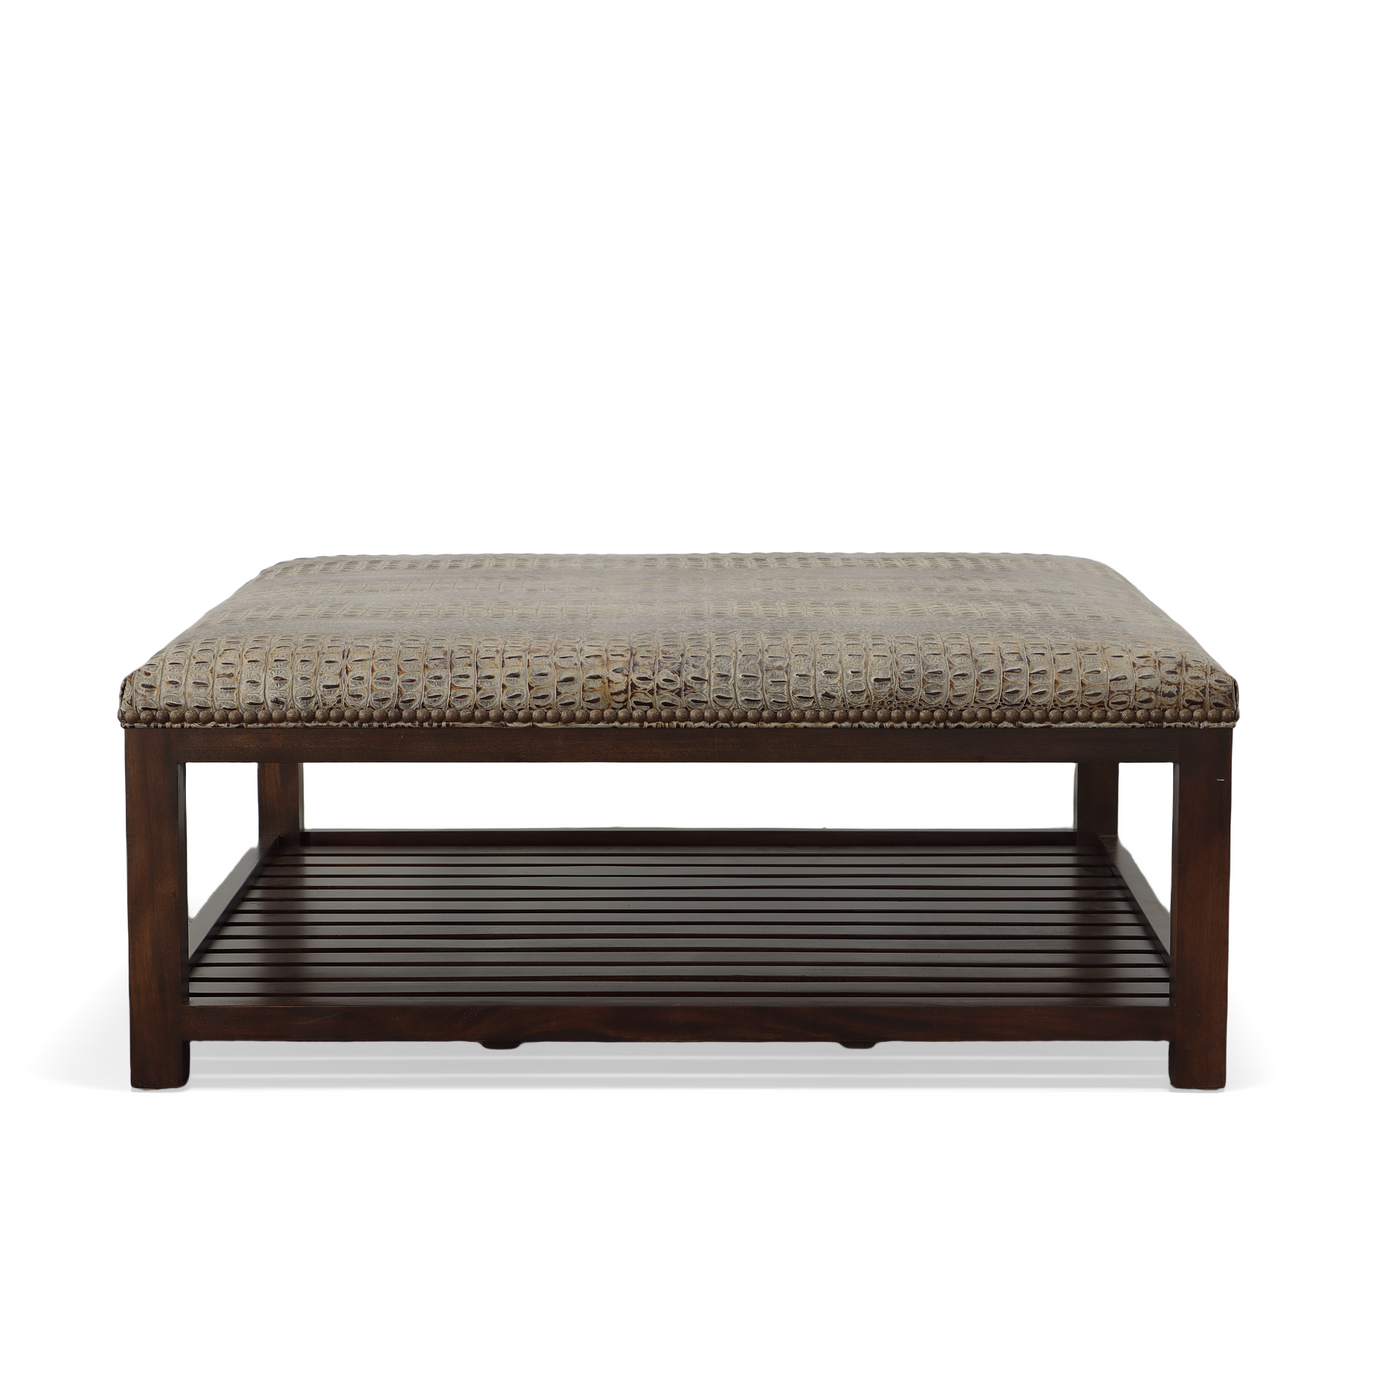 MSD Nelson Ottoman with Trays